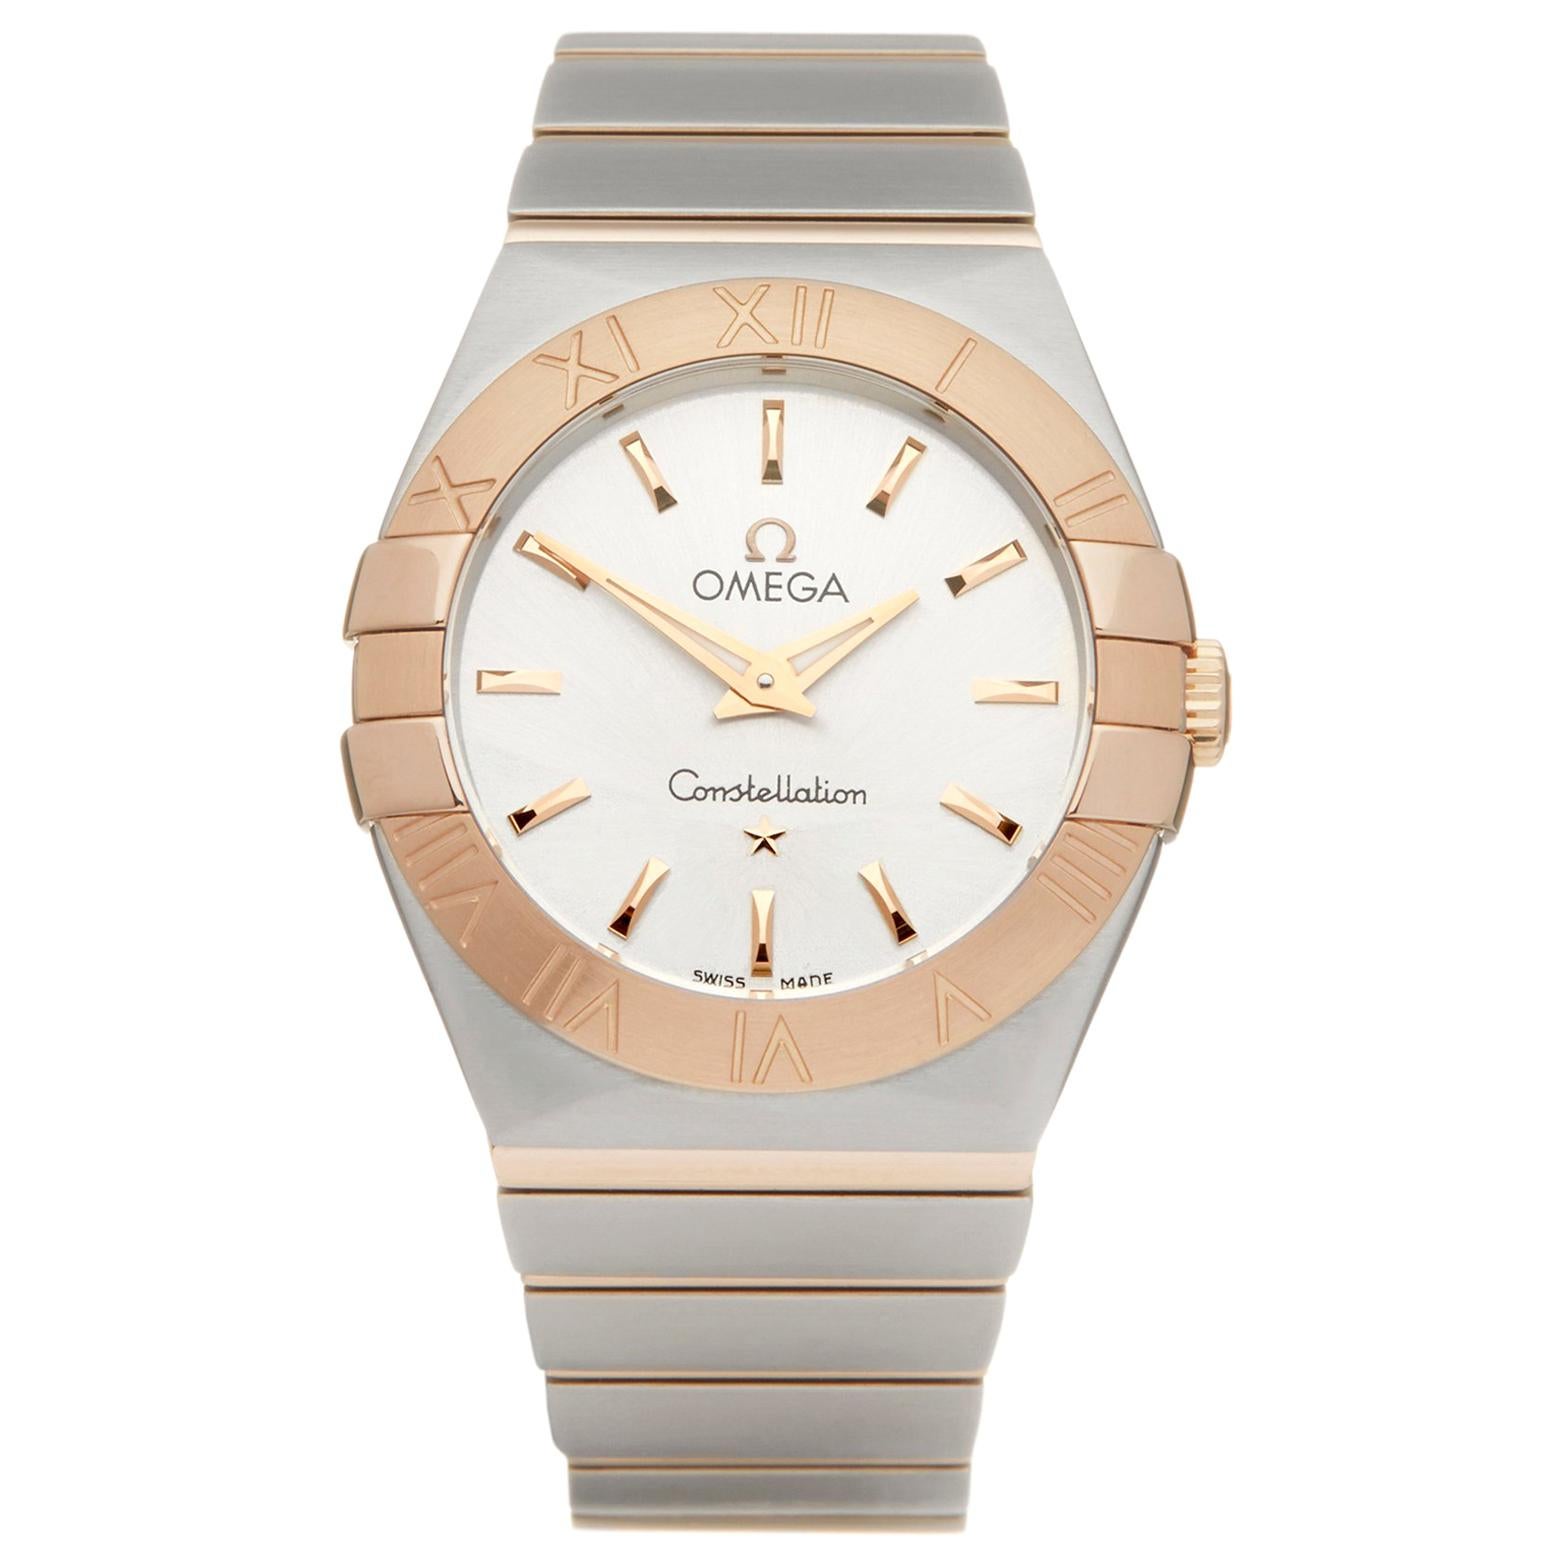 Omega Constellation Stainless Steel and 18K Yellow Gold 123.20.27.60.02.004 